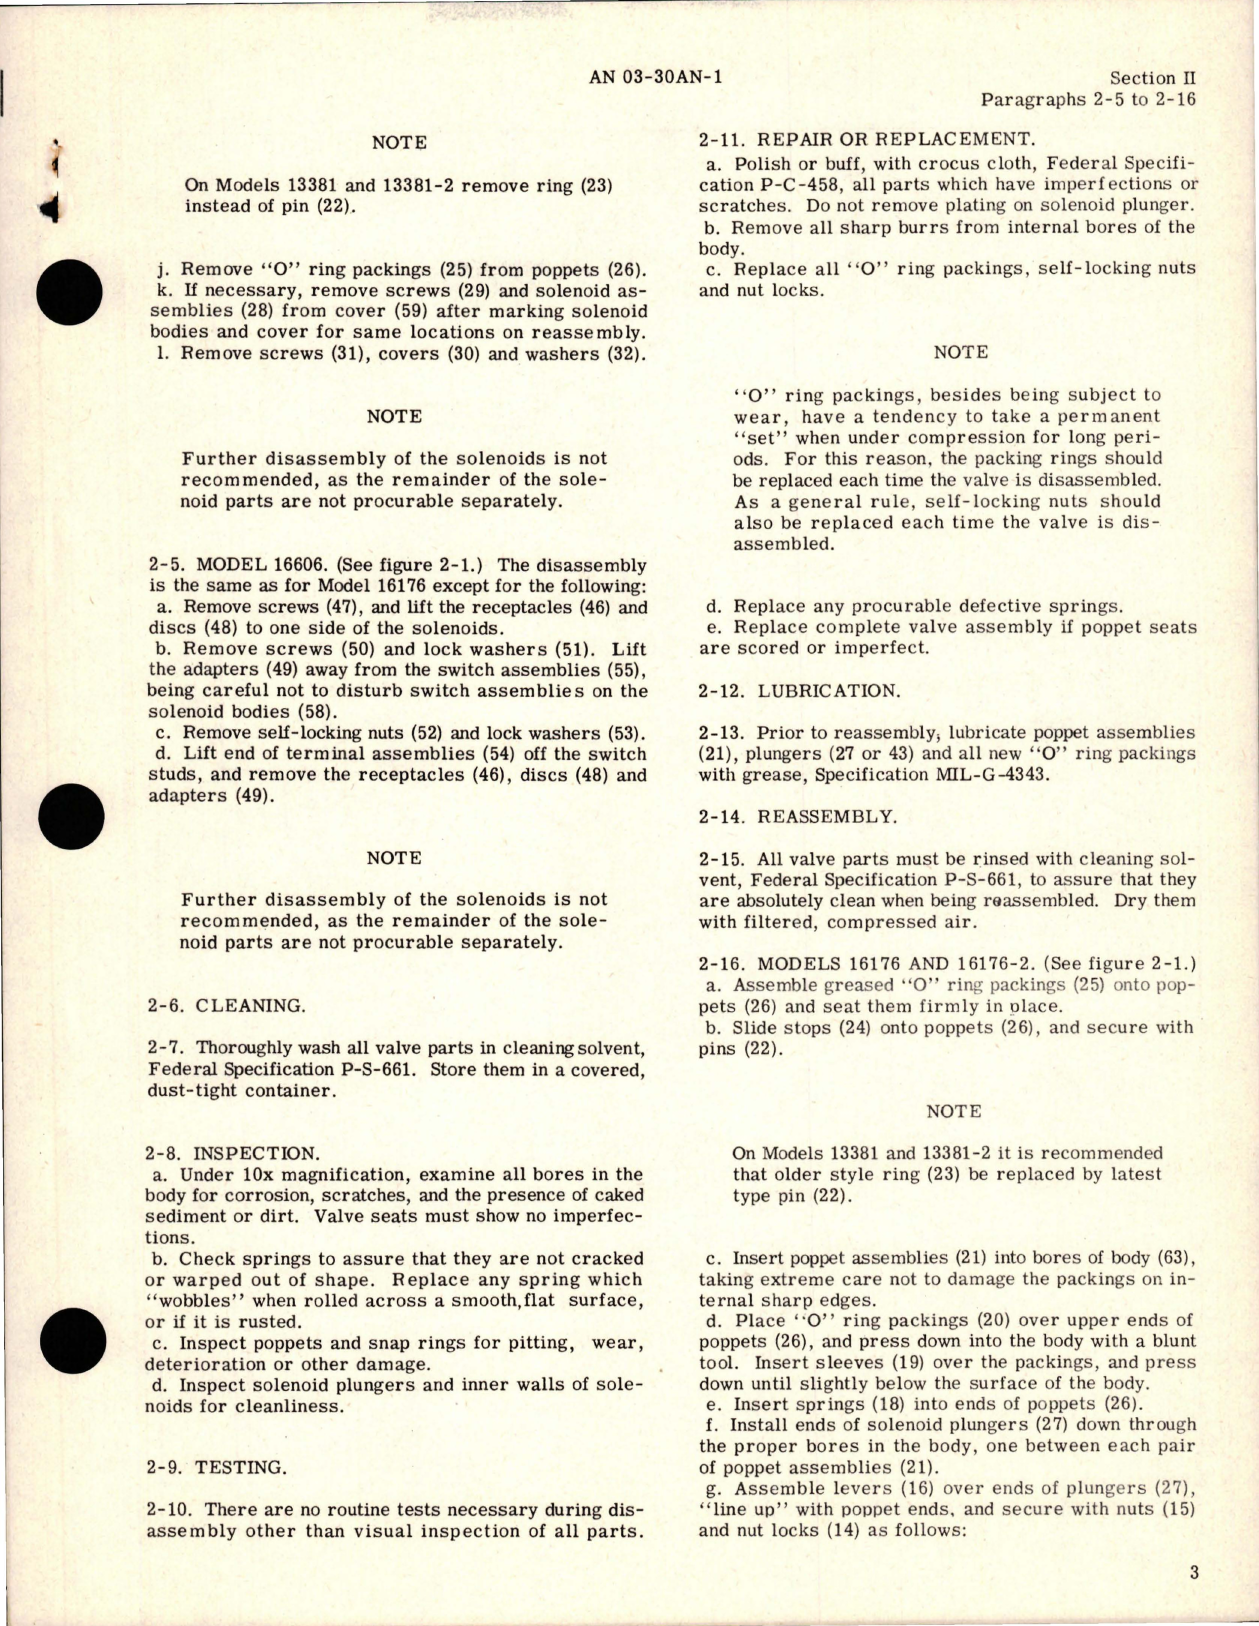 Sample page 5 from AirCorps Library document: Overhaul Instructions for Solenoid Operated 4-Way Pneumatic Valve - Models 13381, 13381-2, 16176, 16176-2, 16606 